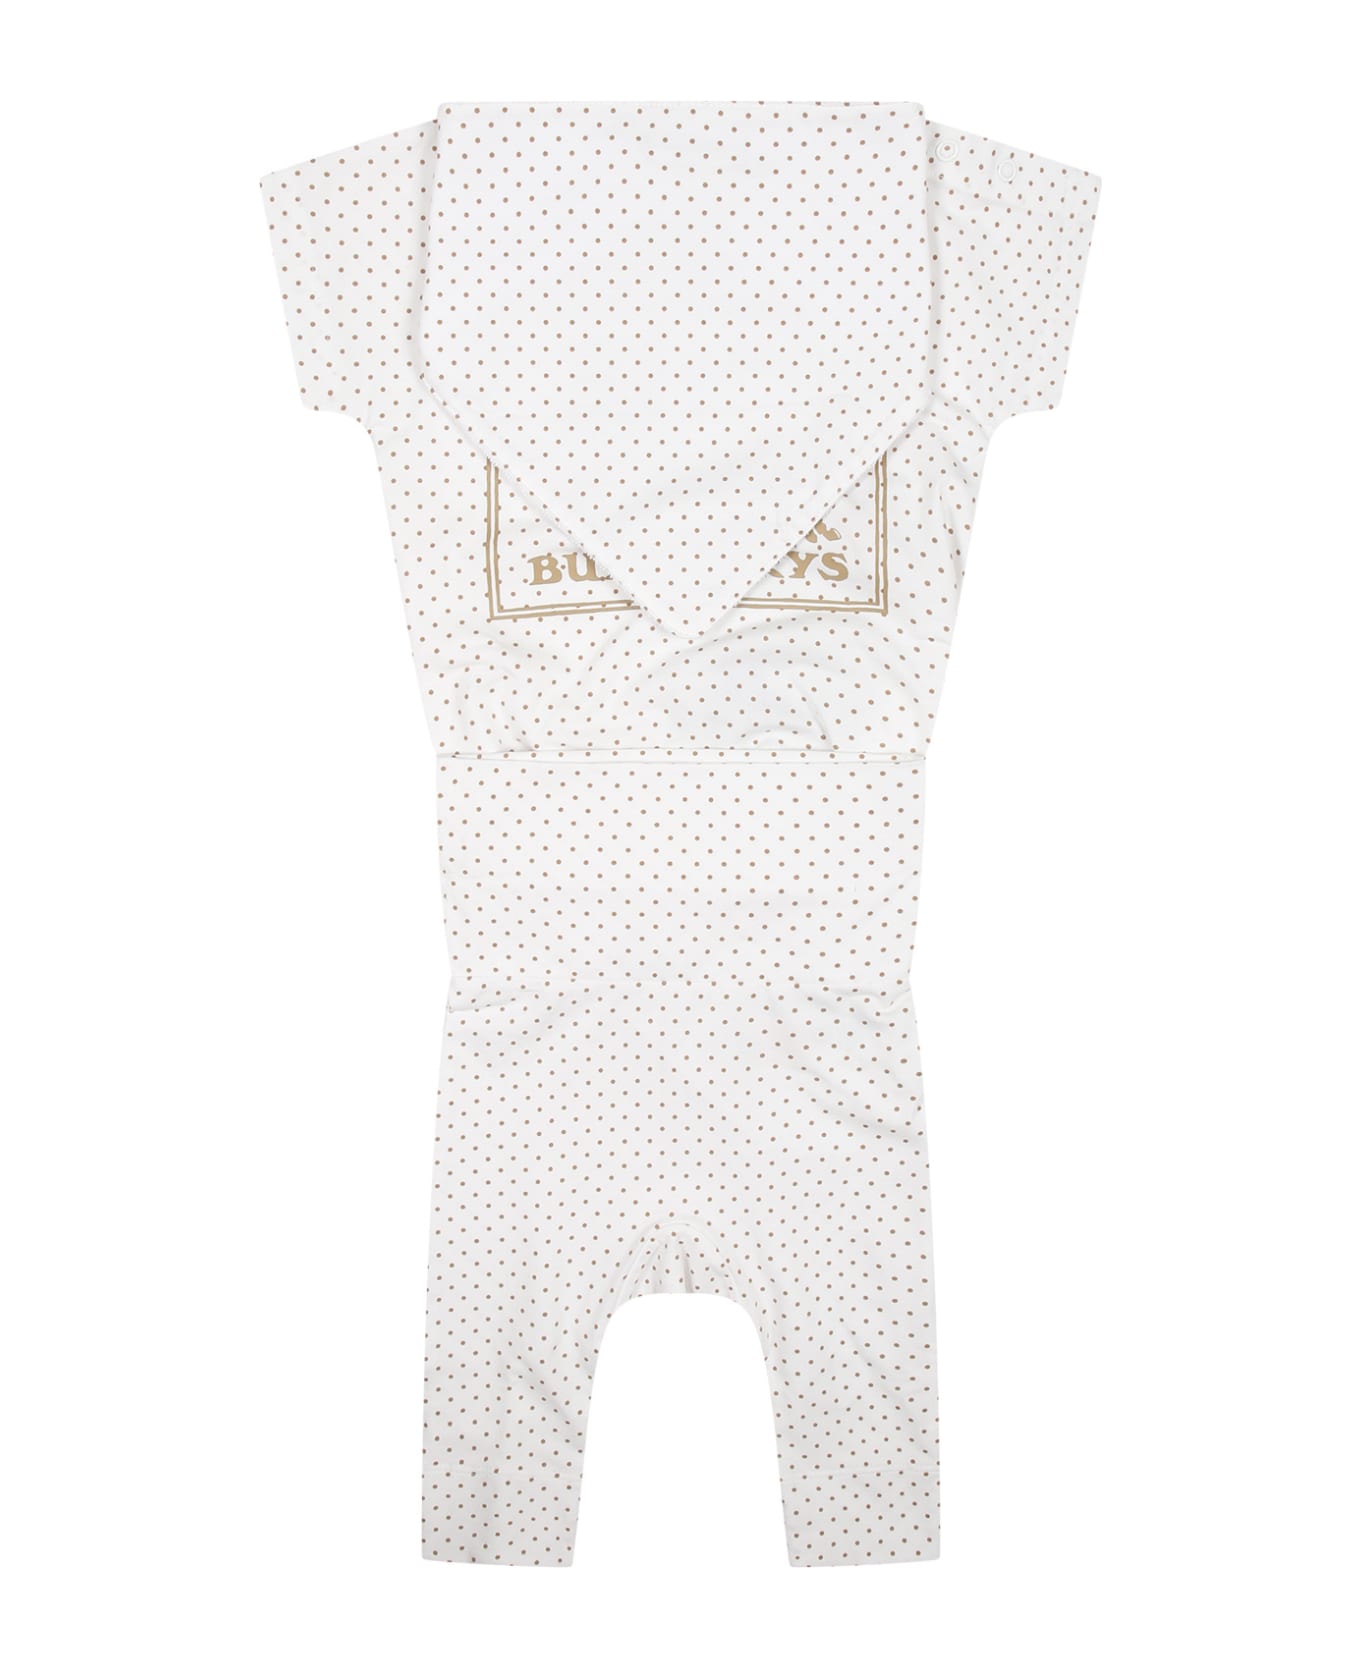 Burberry White Babies Outfit With All-over Logo And Polka Dots - White